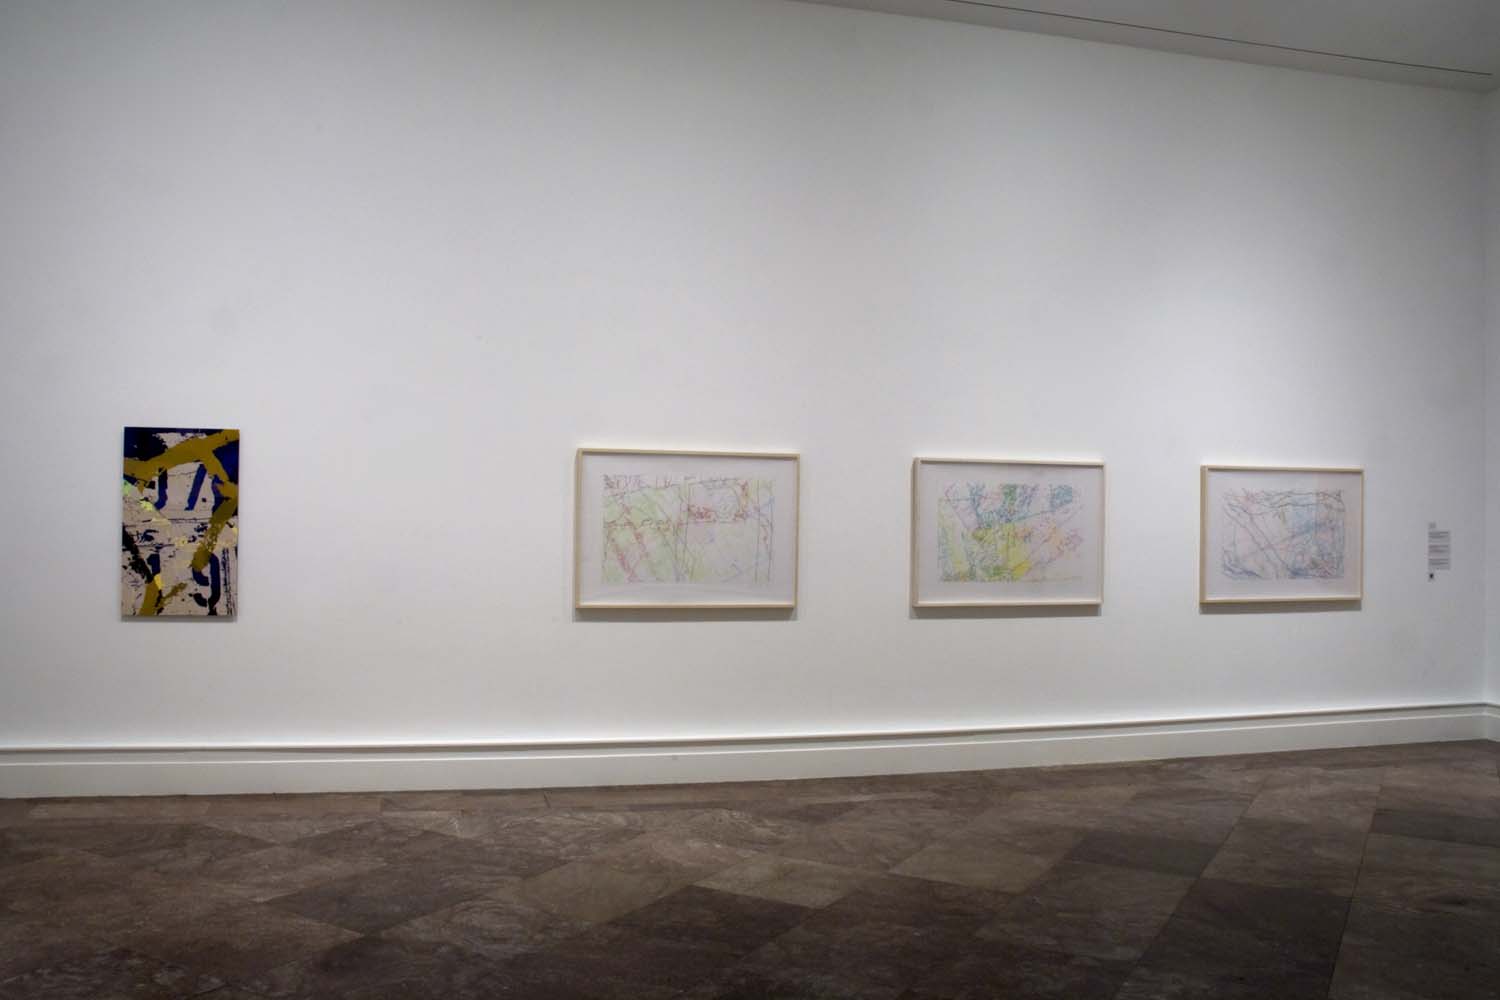 Albright Knox Art Gallery, installation view of "Ingrid Calame: Step on a Crack," 2009